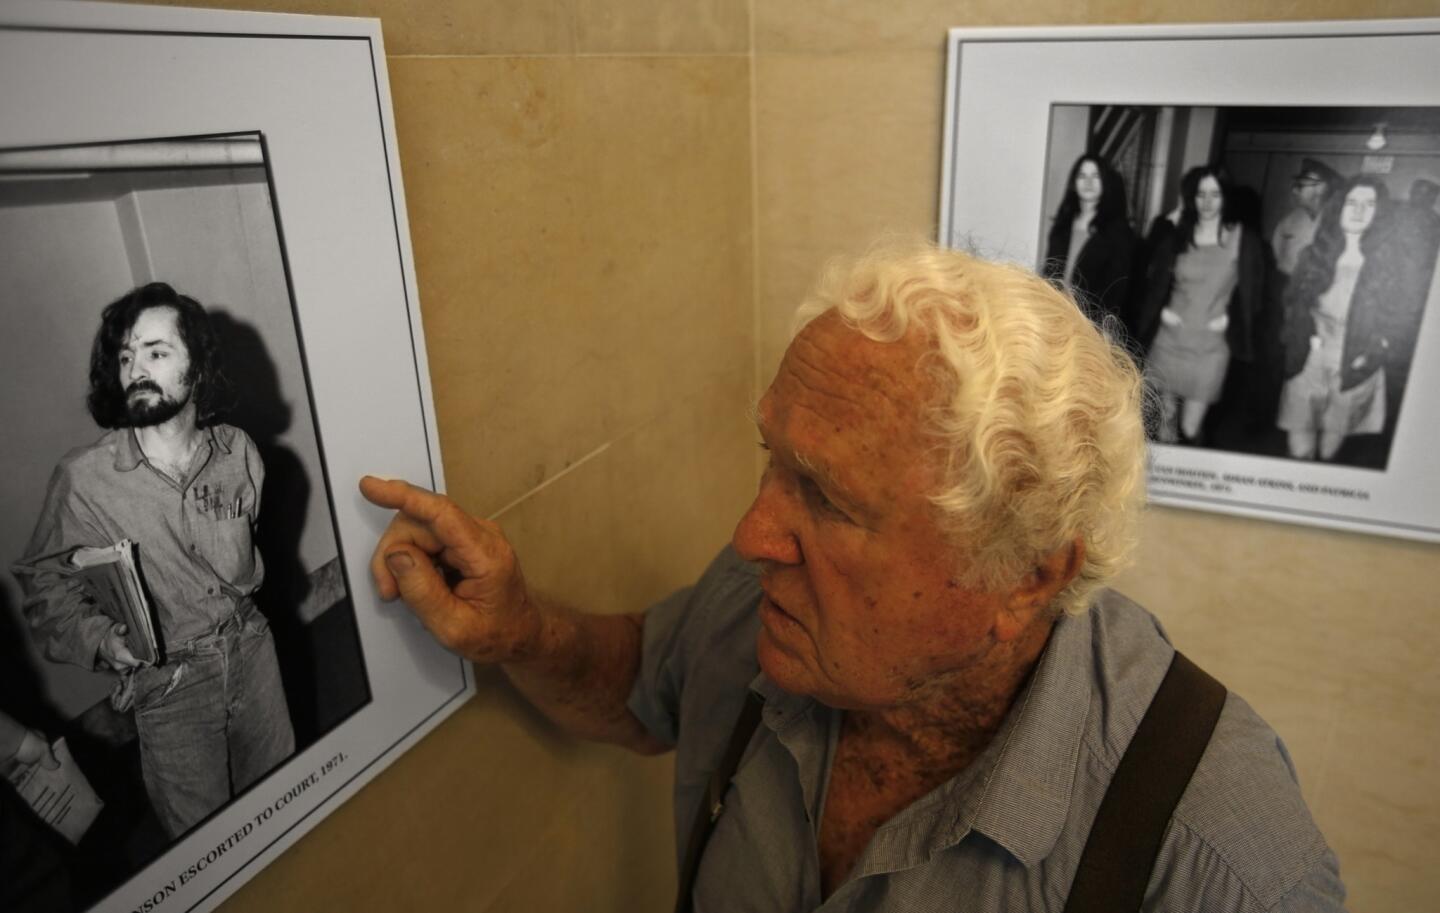 George Meyer, 86, a former Los Angeles County jailer, looks at a photograph showing cult leader Charles Manson being escorted to court at the Hall of Justice in 1971. Meyer, who attended today's reopening of the Hall of Justice, said he remembers securing Manson after his many court appearances.